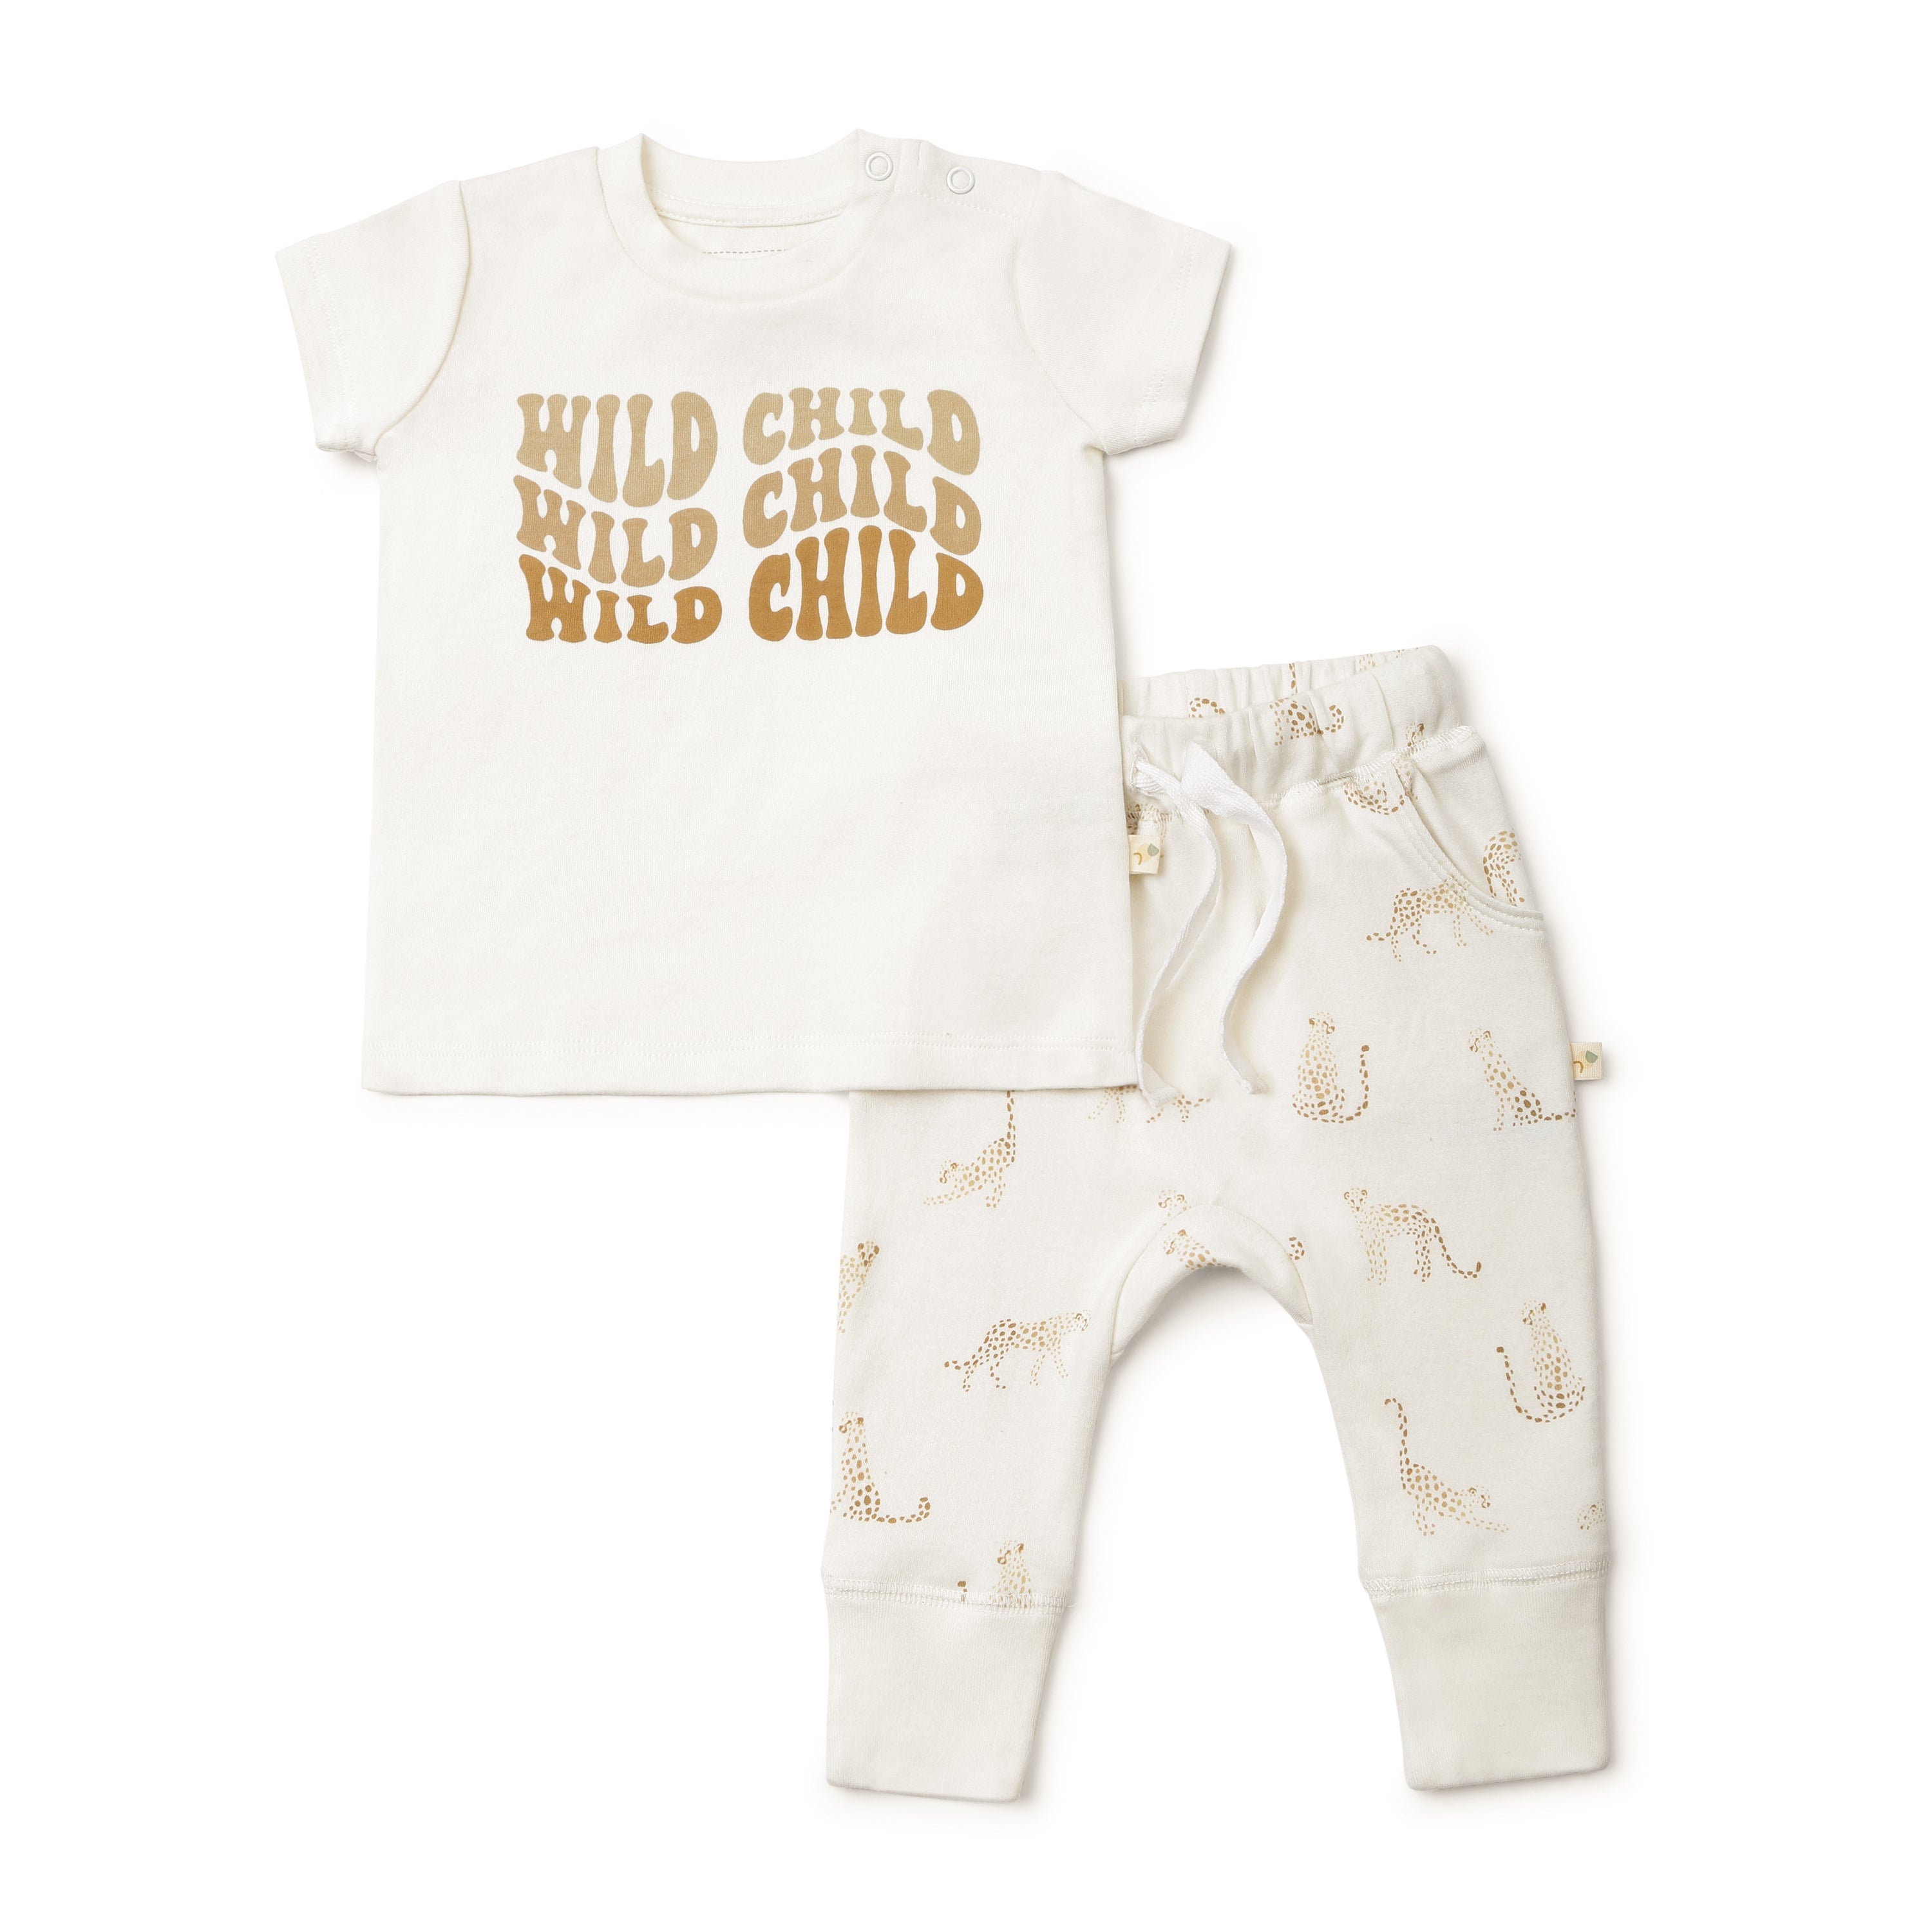 A white baby outfit by Organic Kids consisting of an Organic Tee & Pants Set - Wild Child displayed on a plain background.